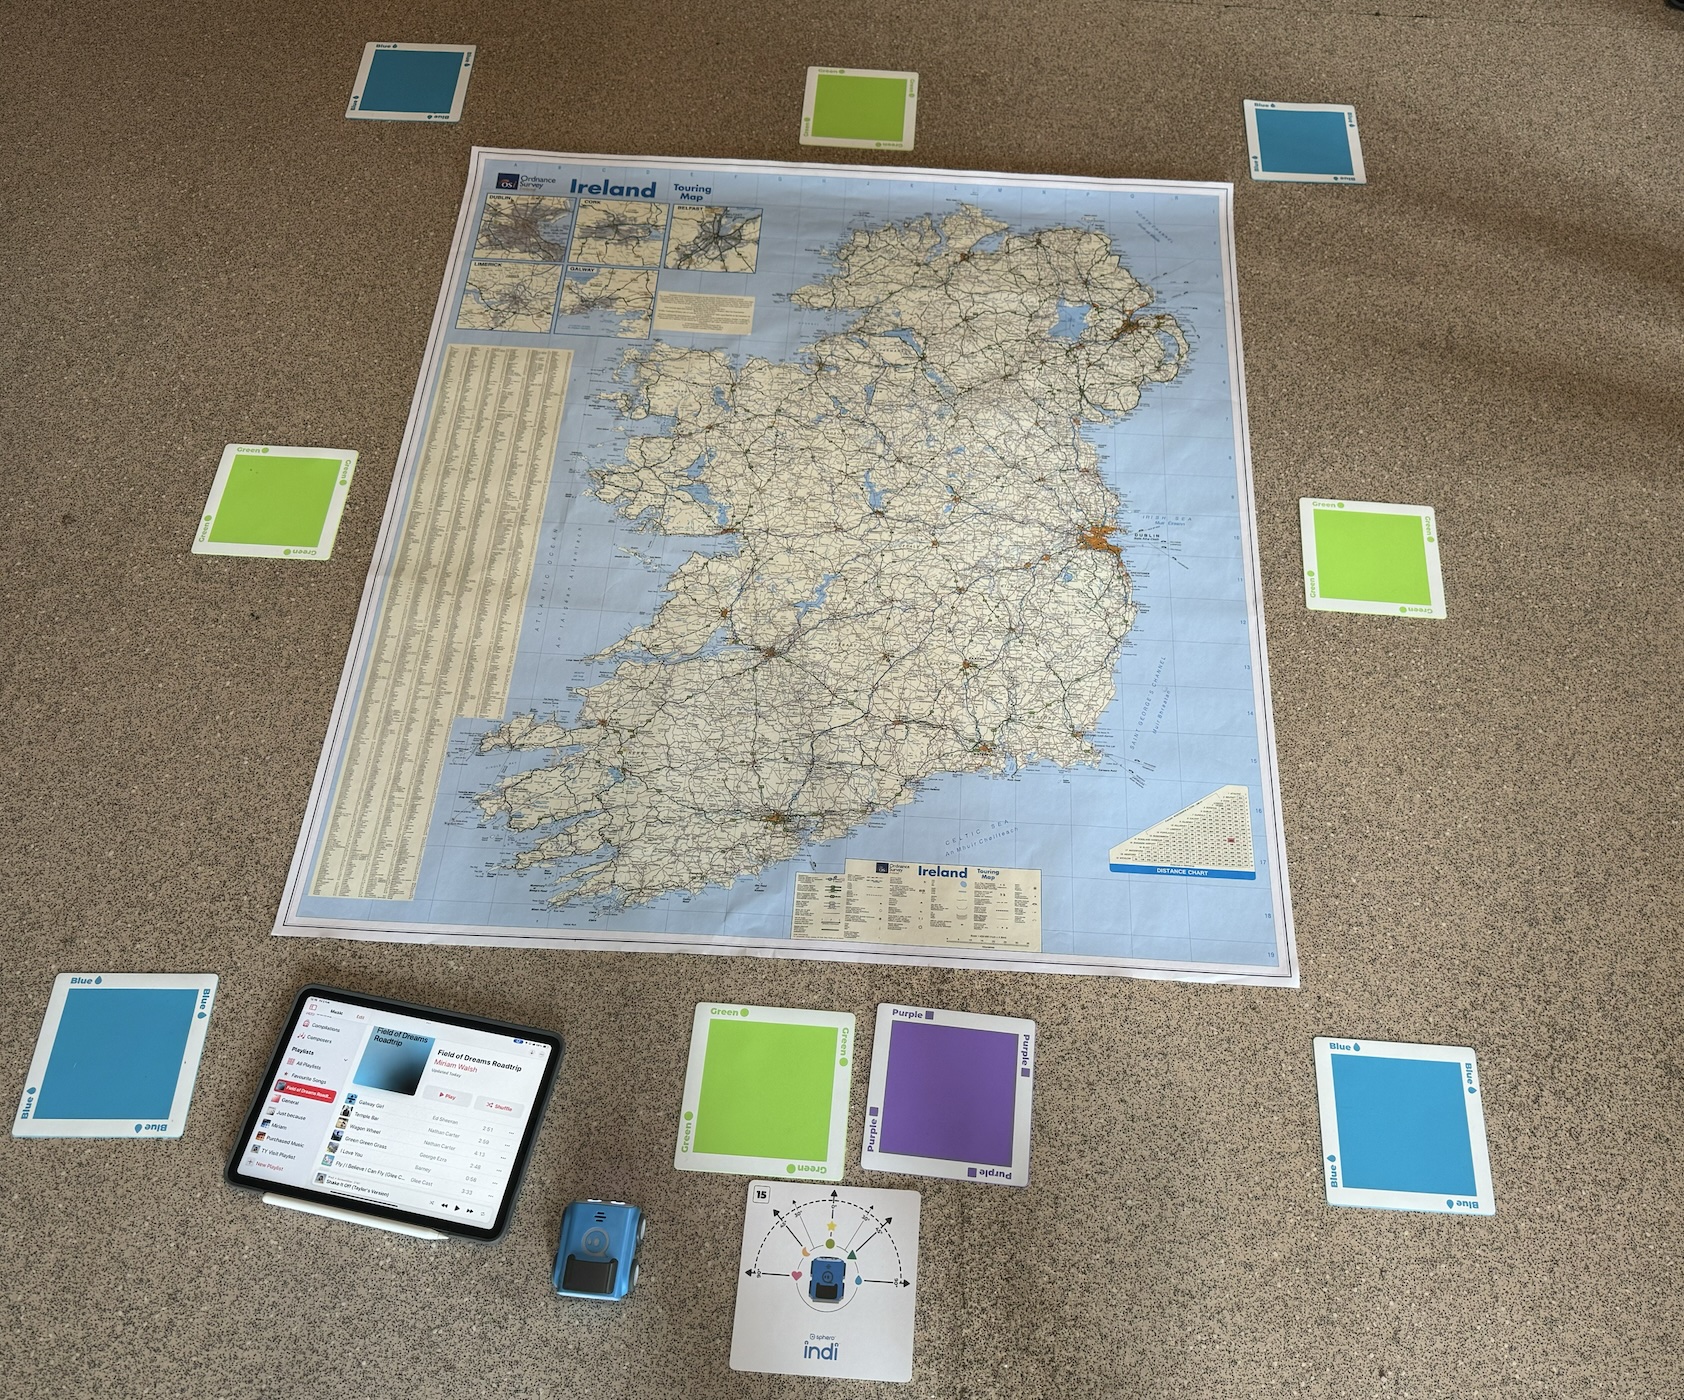 Image of a map of Ireland on the floor, with an iPad showing an Apple Music Playlist and some Indi coding cars. 